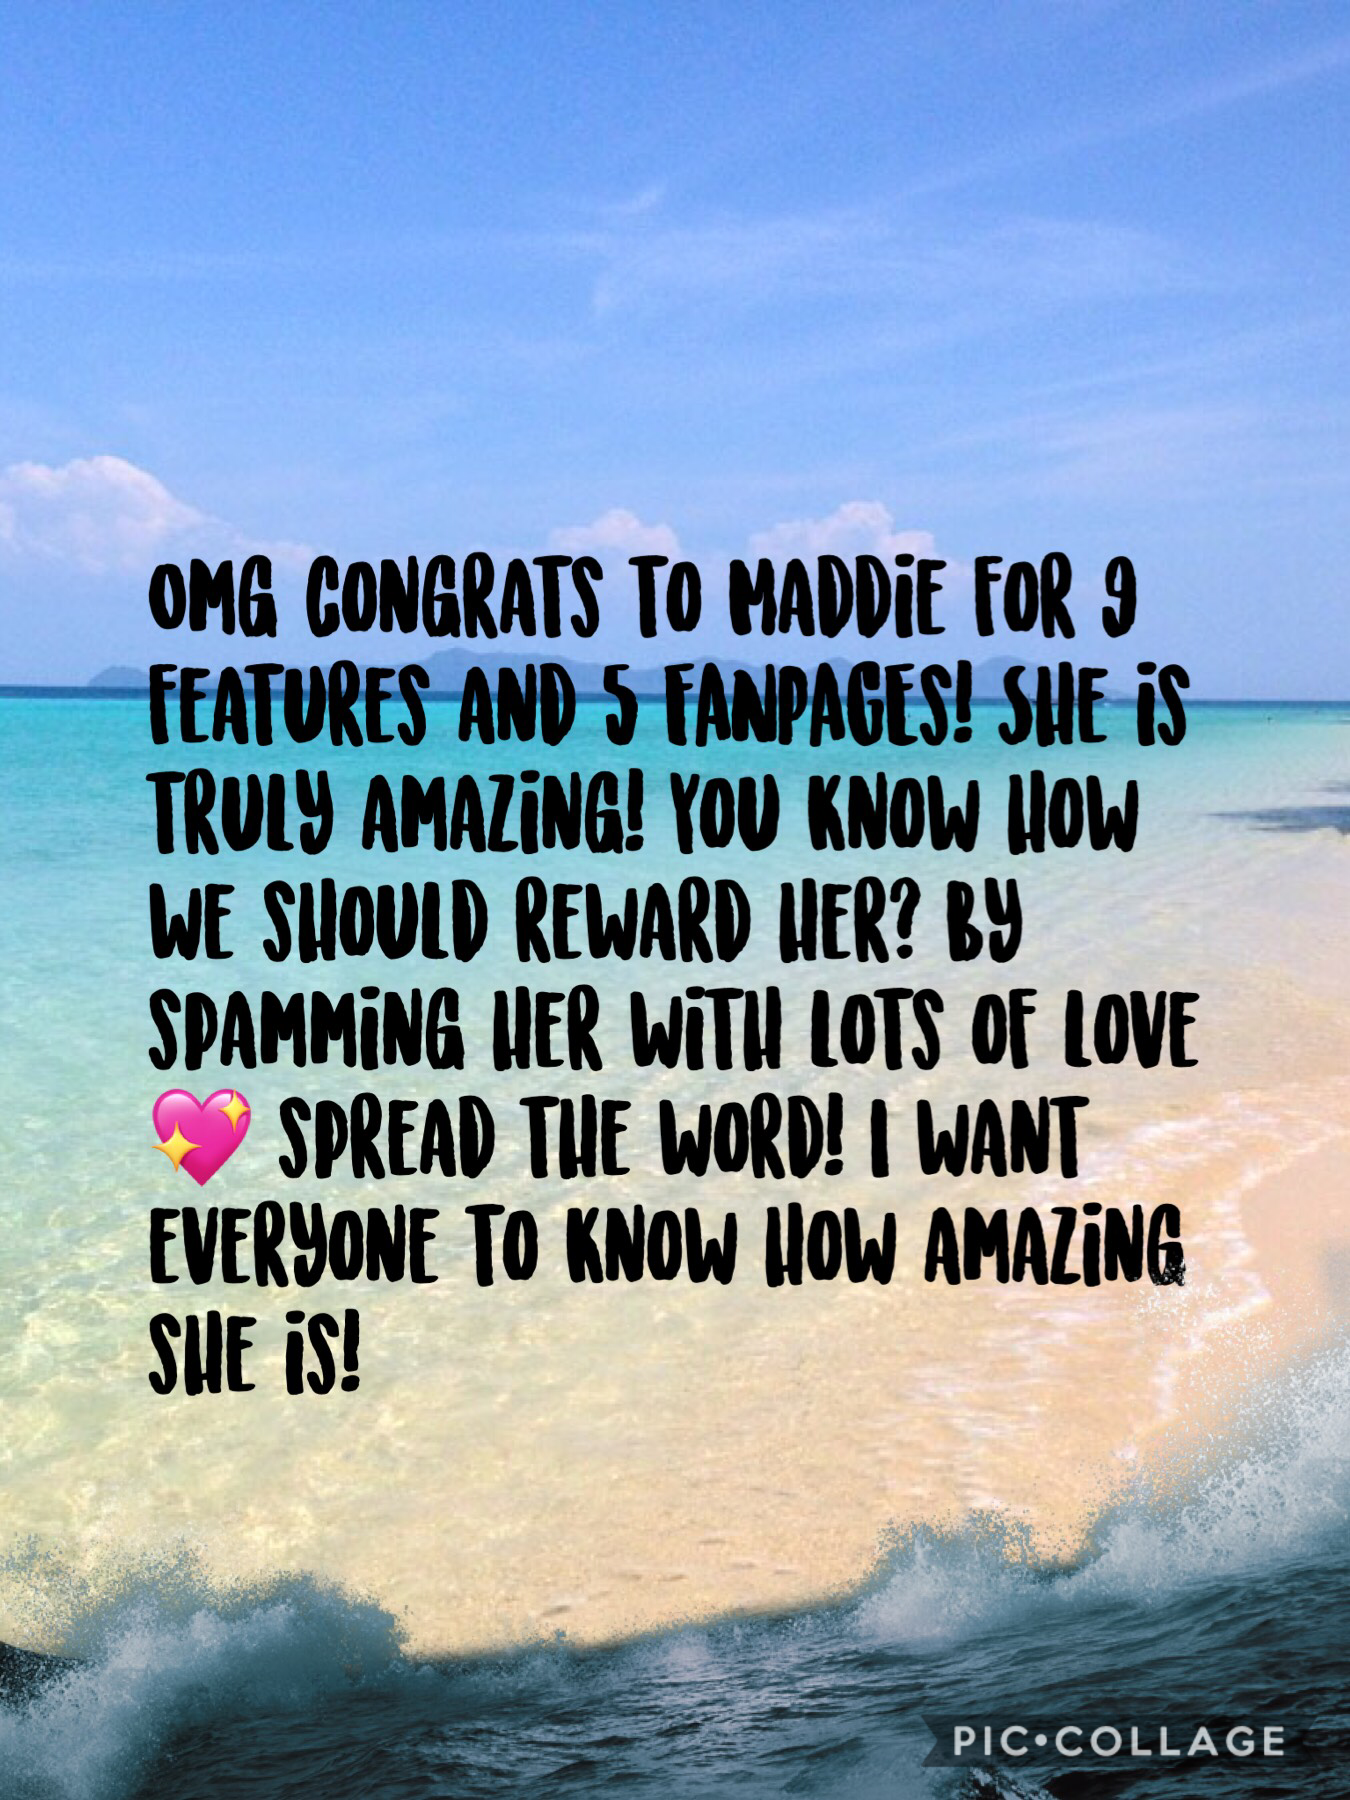 Spread the word! Let’s spam Maddie (-OceanBreeze-) with lots of love💕